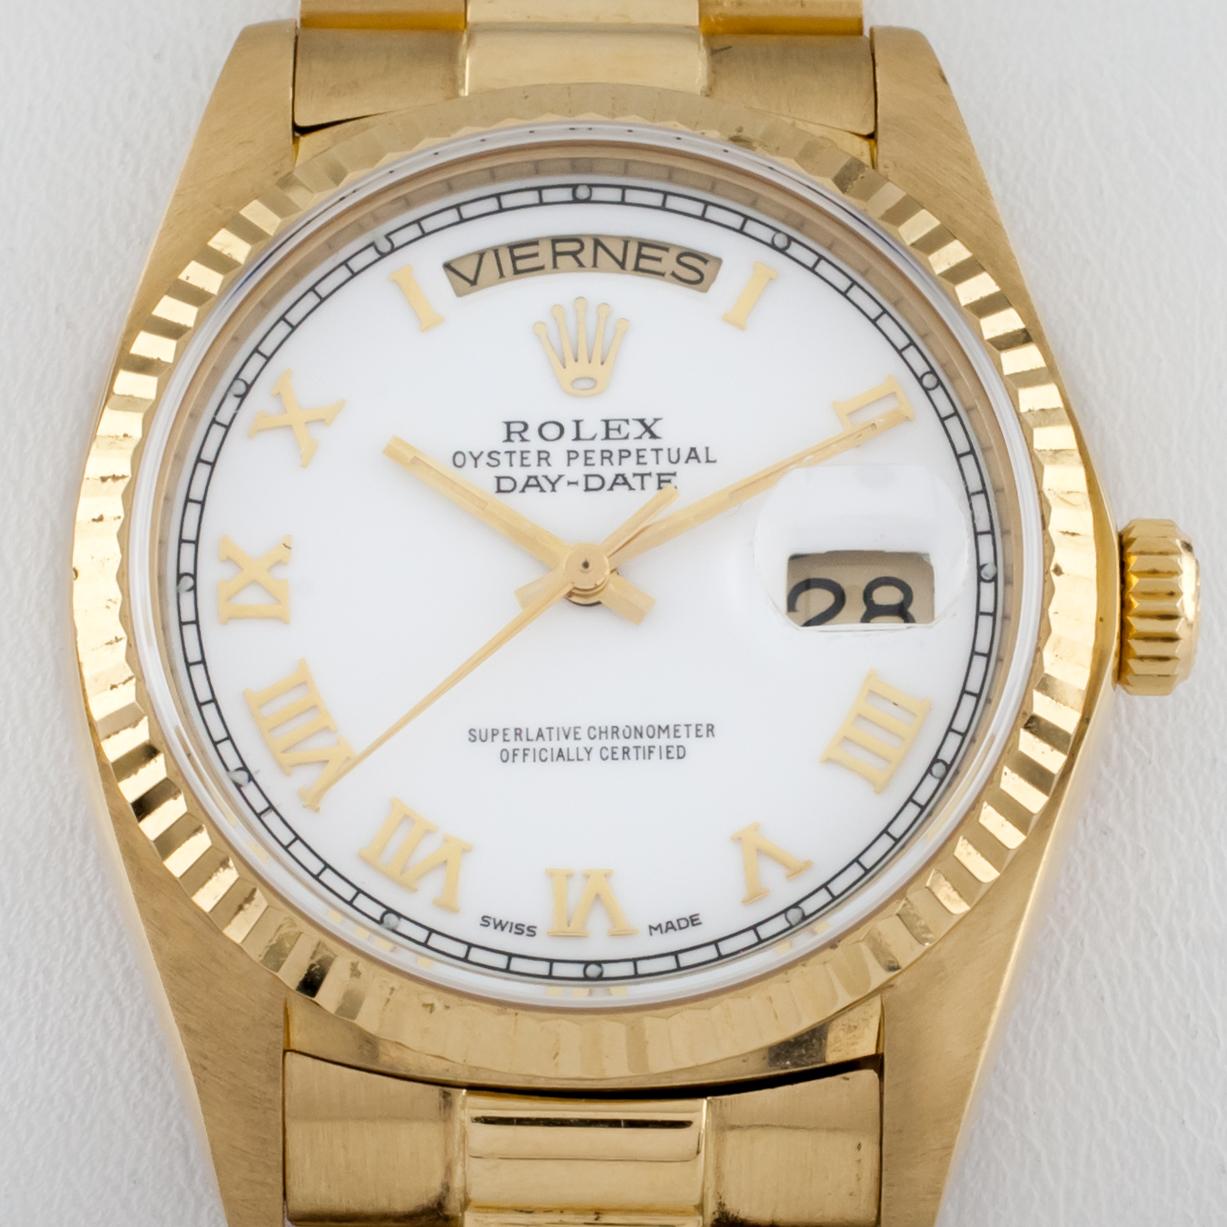 18k Yellow Gold Case w/ Fluted Bezel
36 mm in Diameter (38 mm w/ Crown)
Lug-to-Lug Distance = 20 mm
Lug-to-Lug Width = 43 mm
Thickness = 12 mm
White Dial w/ Gold Roman Numerals & Hands (S, M, H) and Chapter Ring
NOTE: Day Wheel is Spanish
Trademark